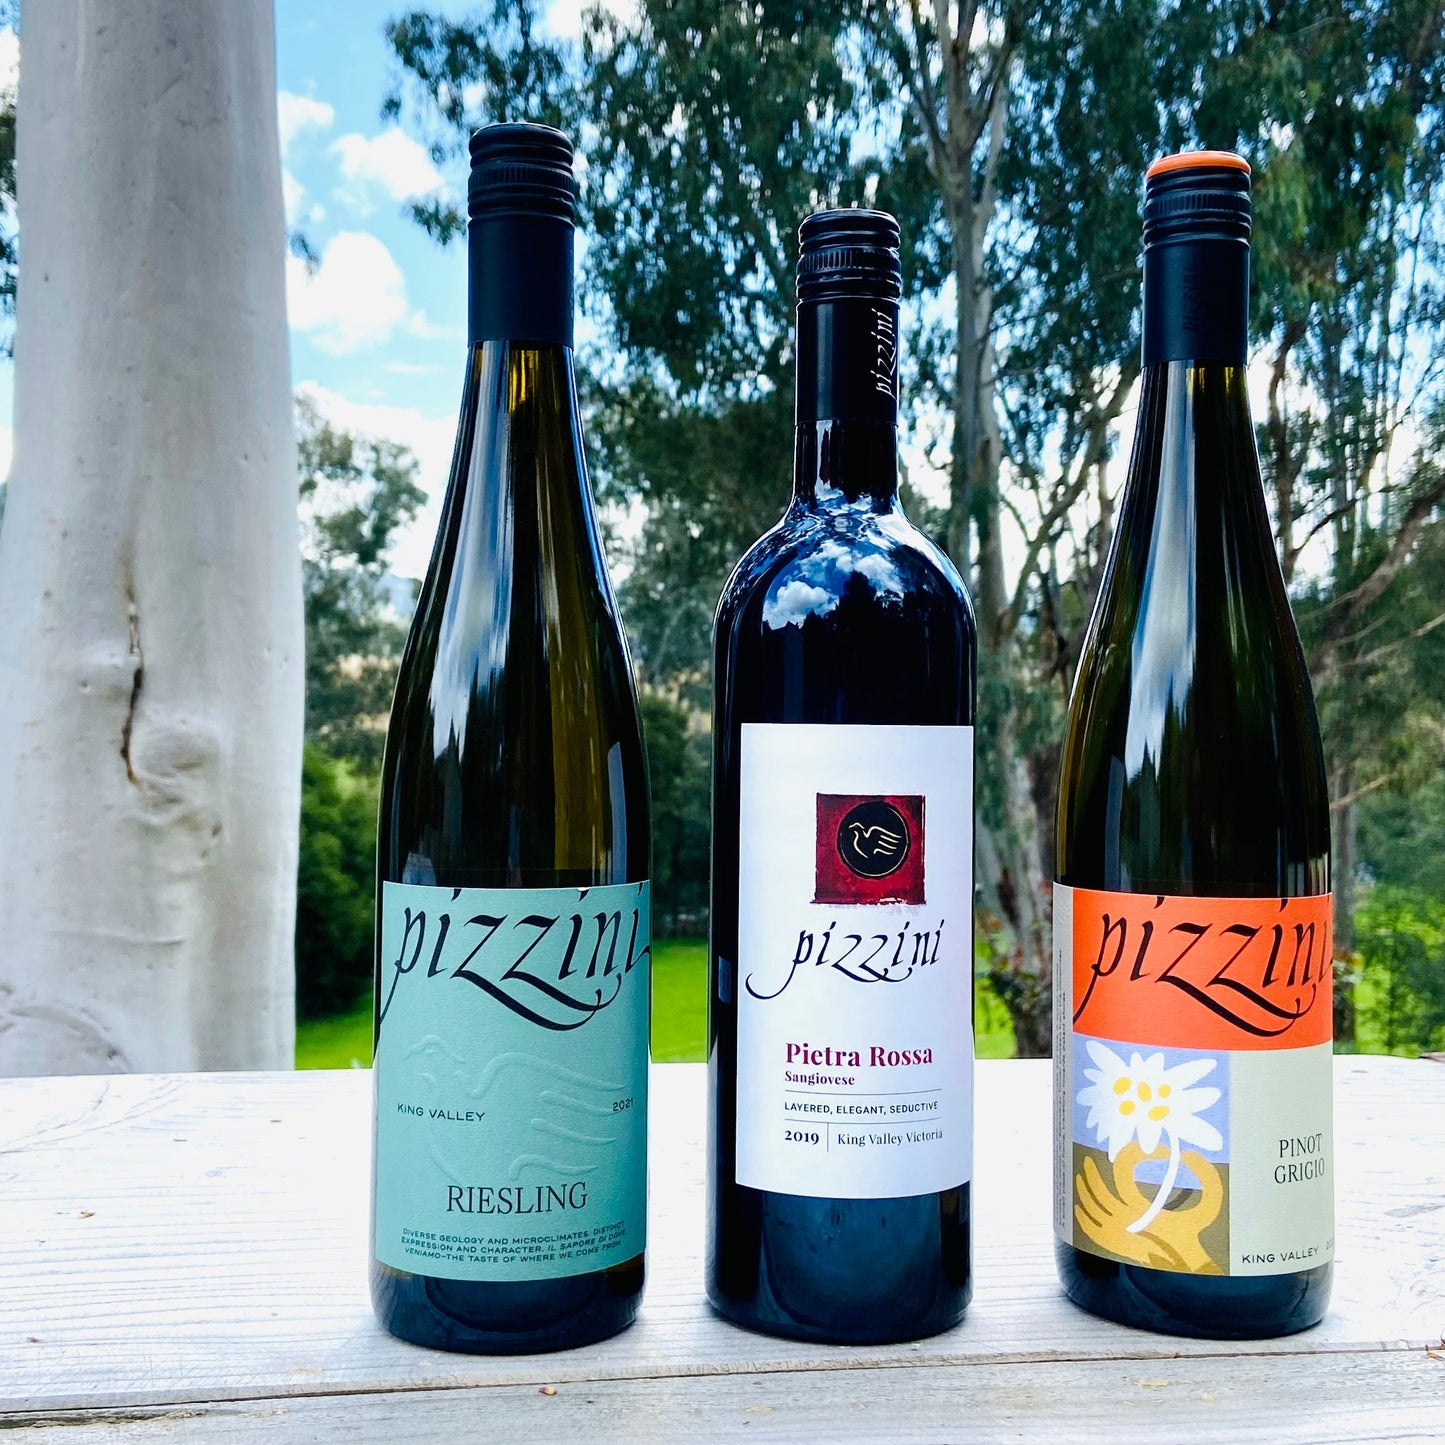 King Valley Wine, Pizzini Pinot Collection